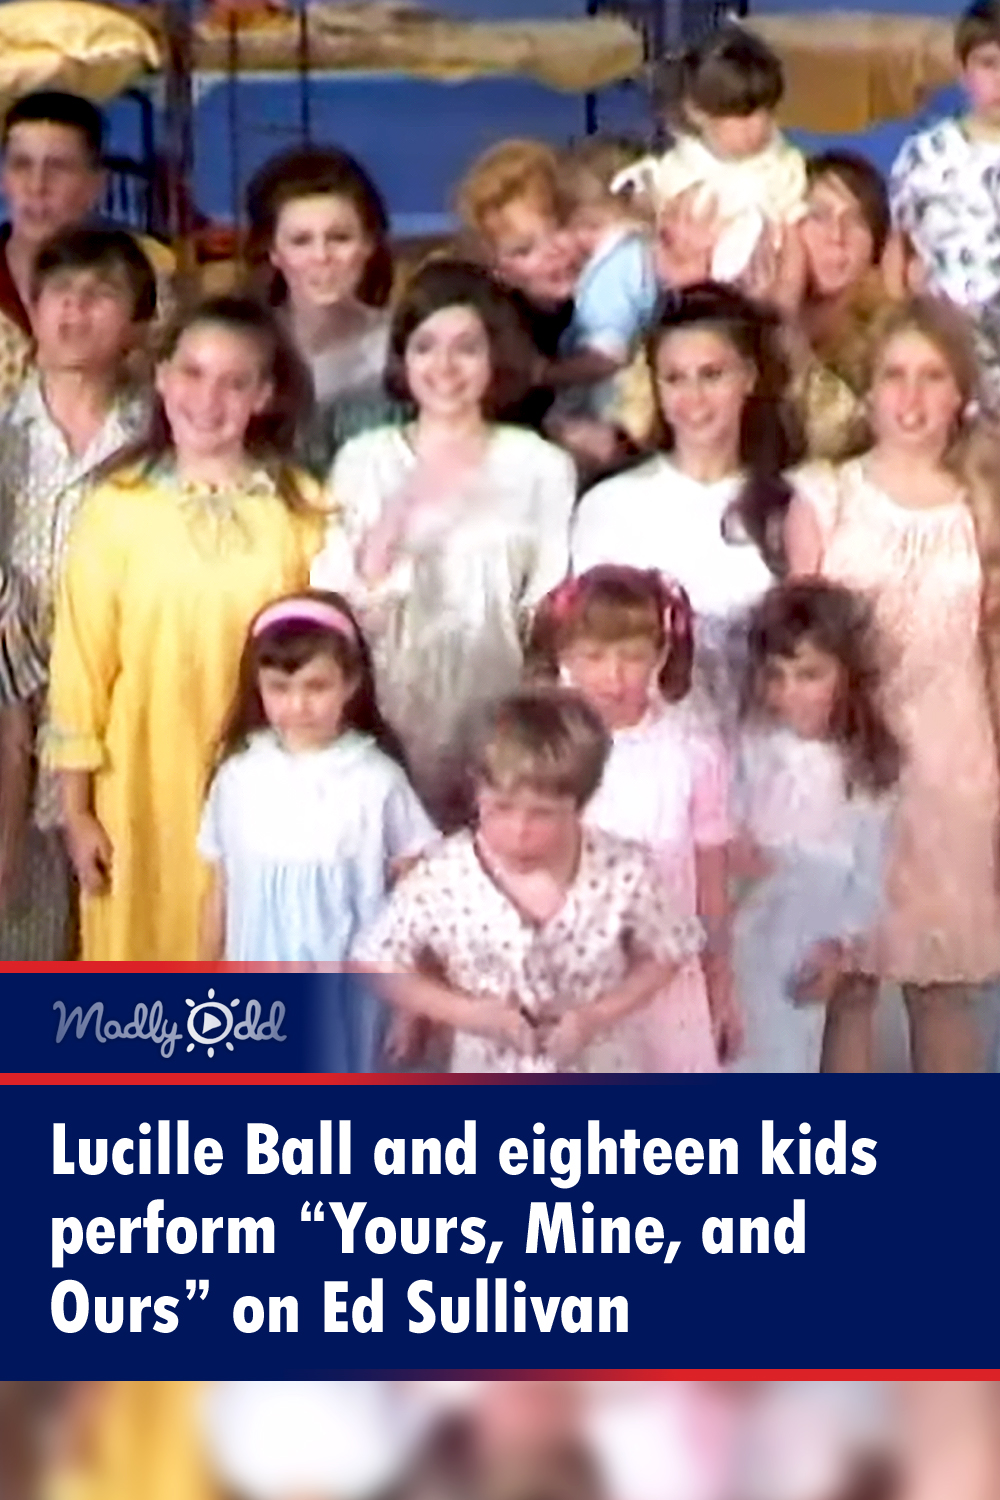 Lucille Ball and eighteen kids perform “Yours, Mine, and Ours” on Ed Sullivan